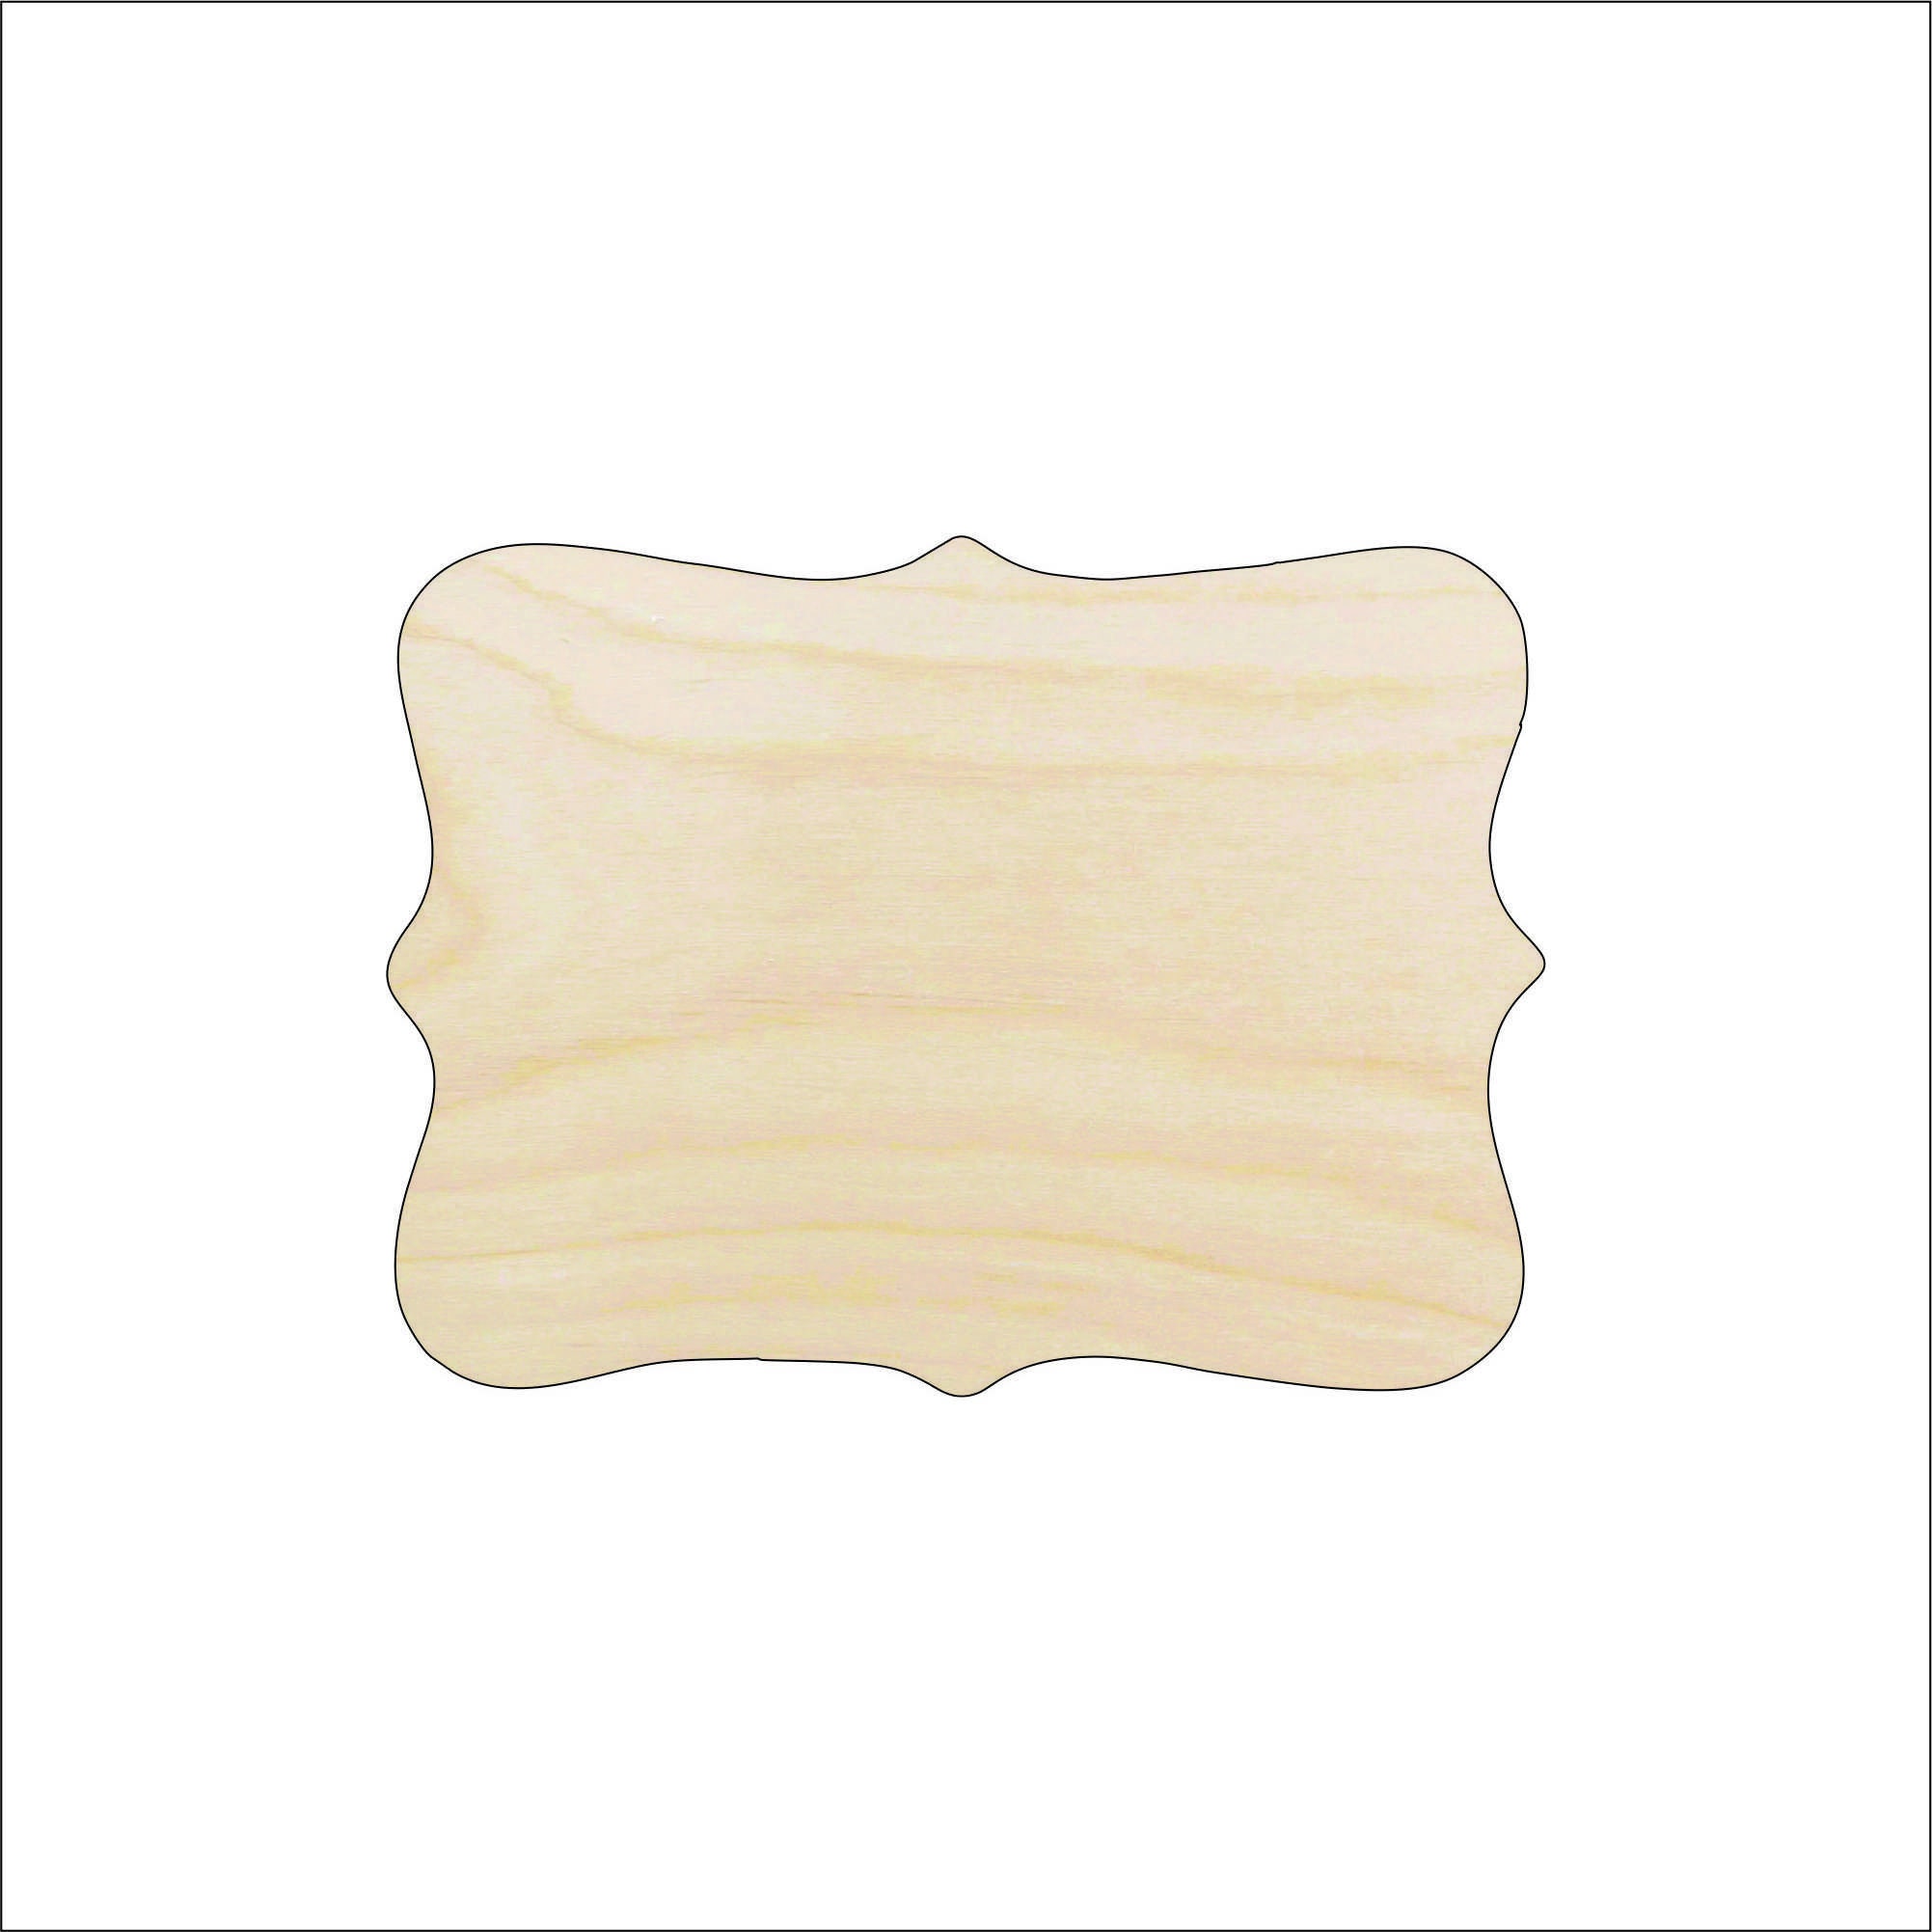 Creative Hobbies® Unfinished Wood Plaques For Crafts, 6.5 Inch x 4.5 Inch,  4 Assorted Shapes